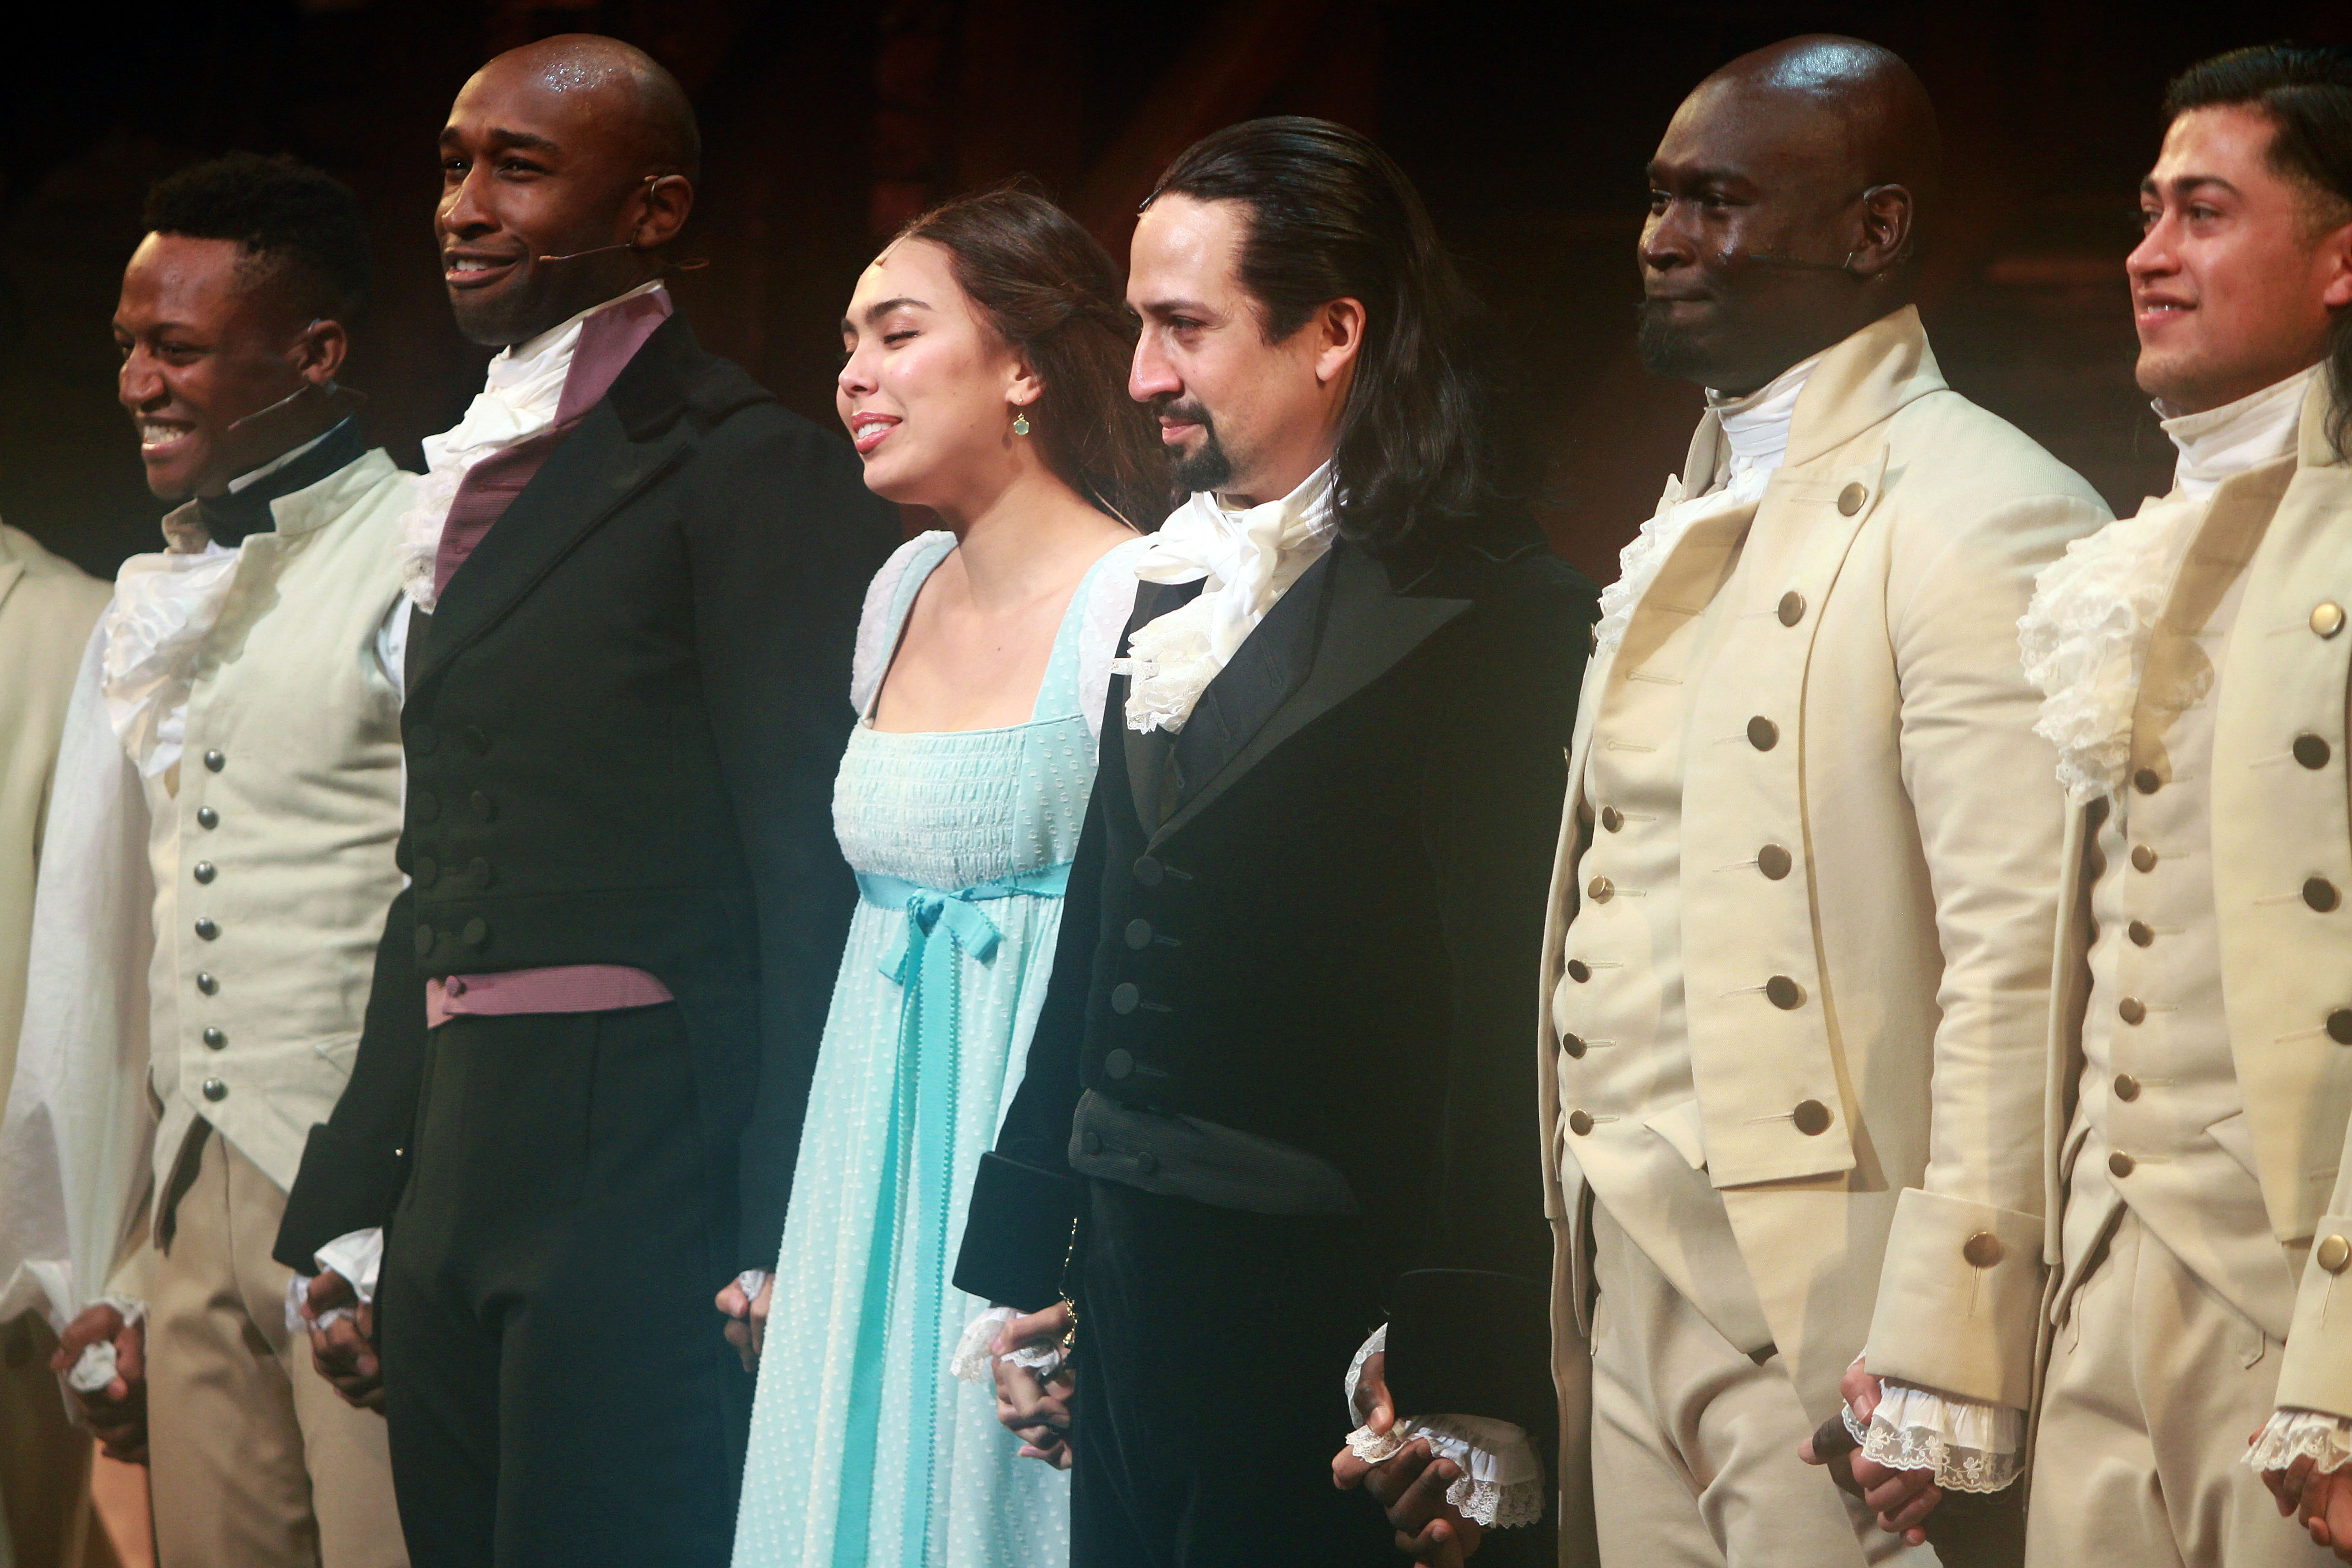 Lin-Manuel Miranda and the cast of 'Hamilton' at the end of their performance